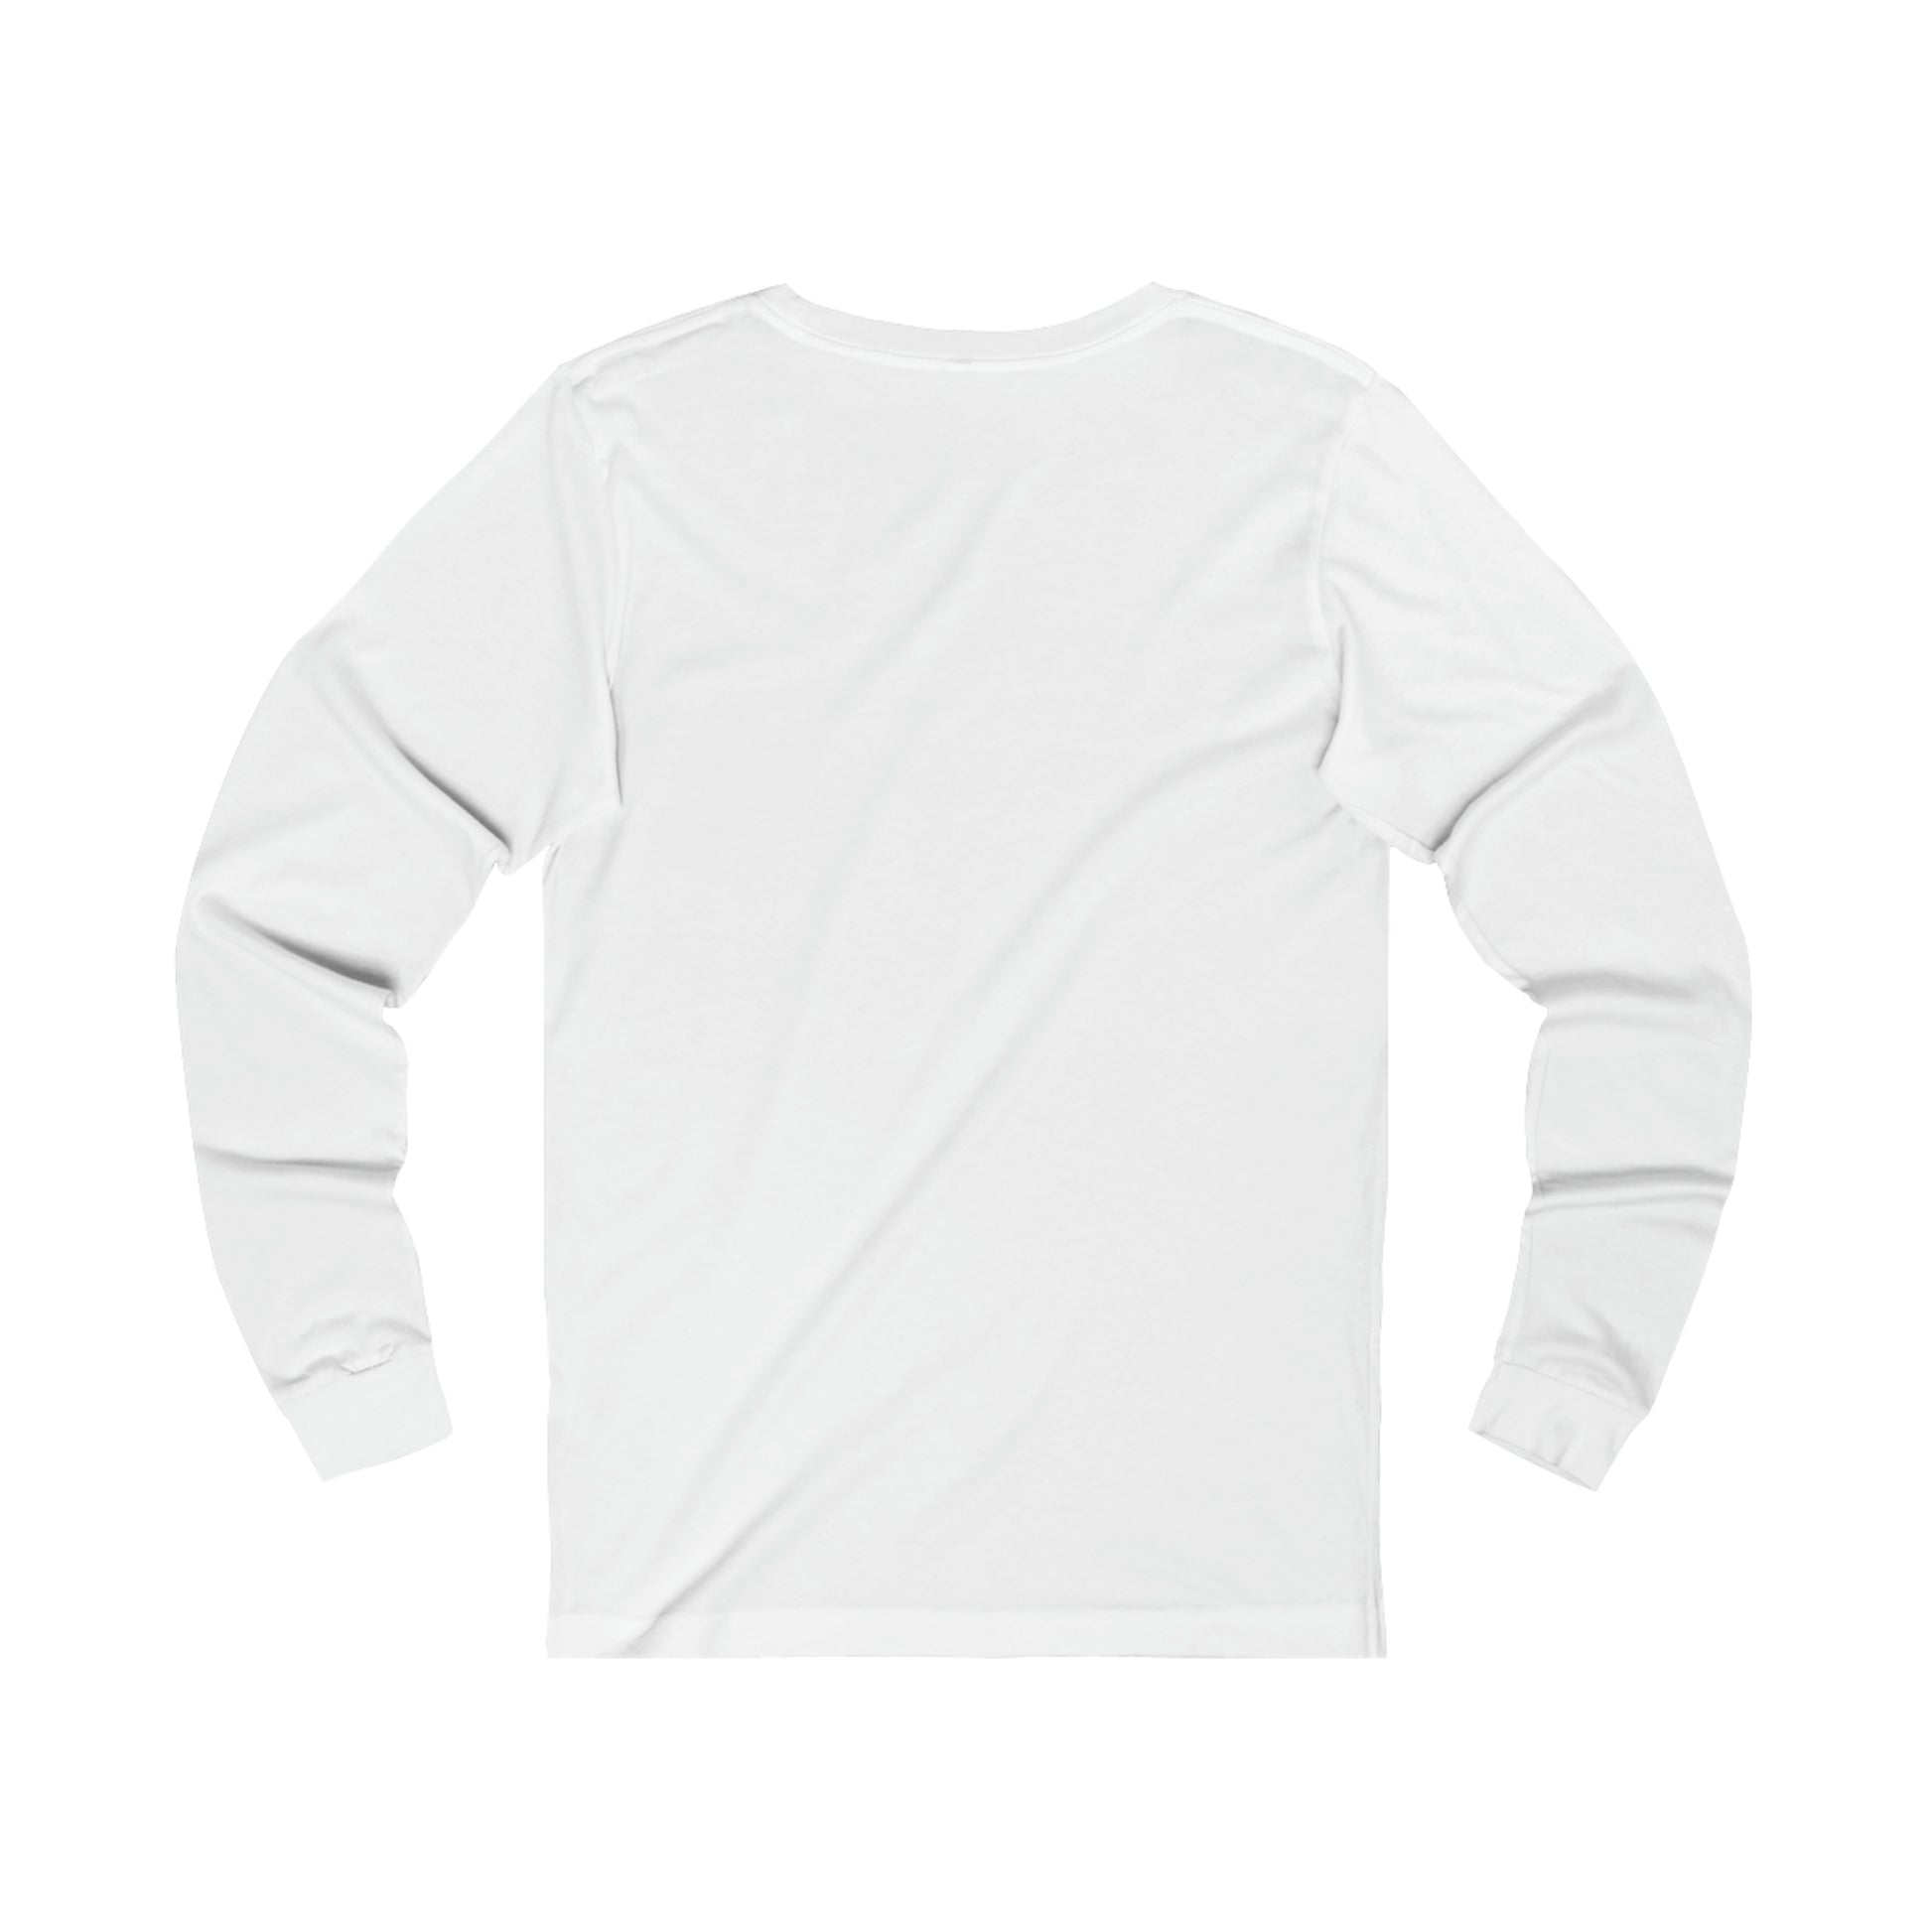 A plain white Unisex Jersey Long Sleeve Signature Logo Tee displayed on a white background, isolated without any model, showing the back view of the shirt in Cabbagetown by Printify.